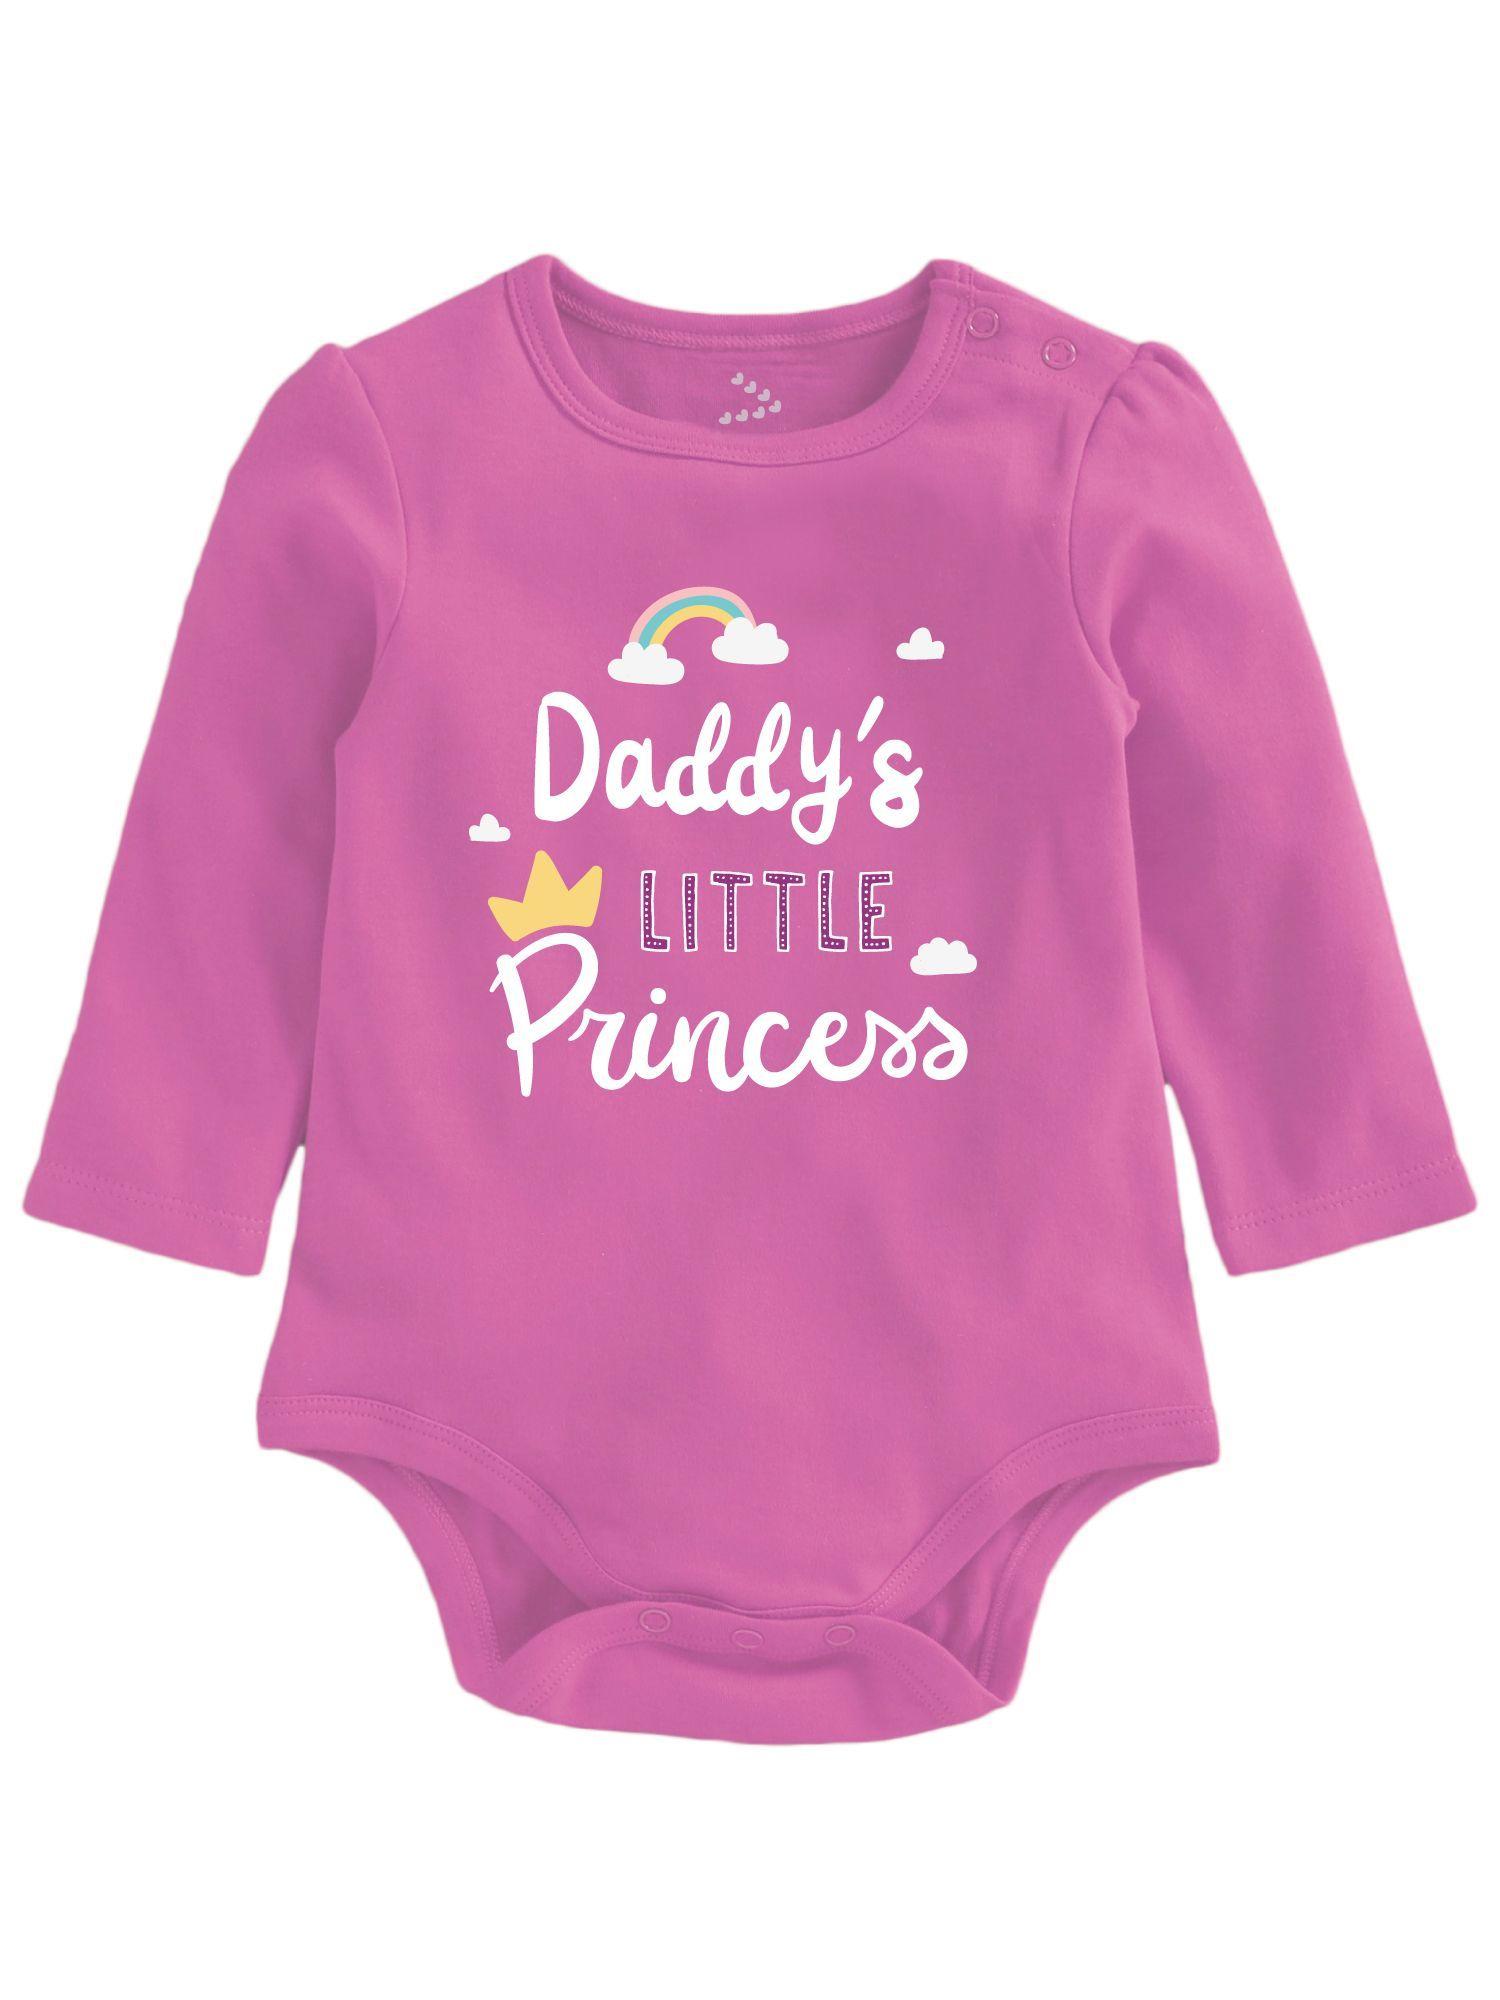 Daddys Little Princess Newborn Baby Romper Father & Baby Girl Theme